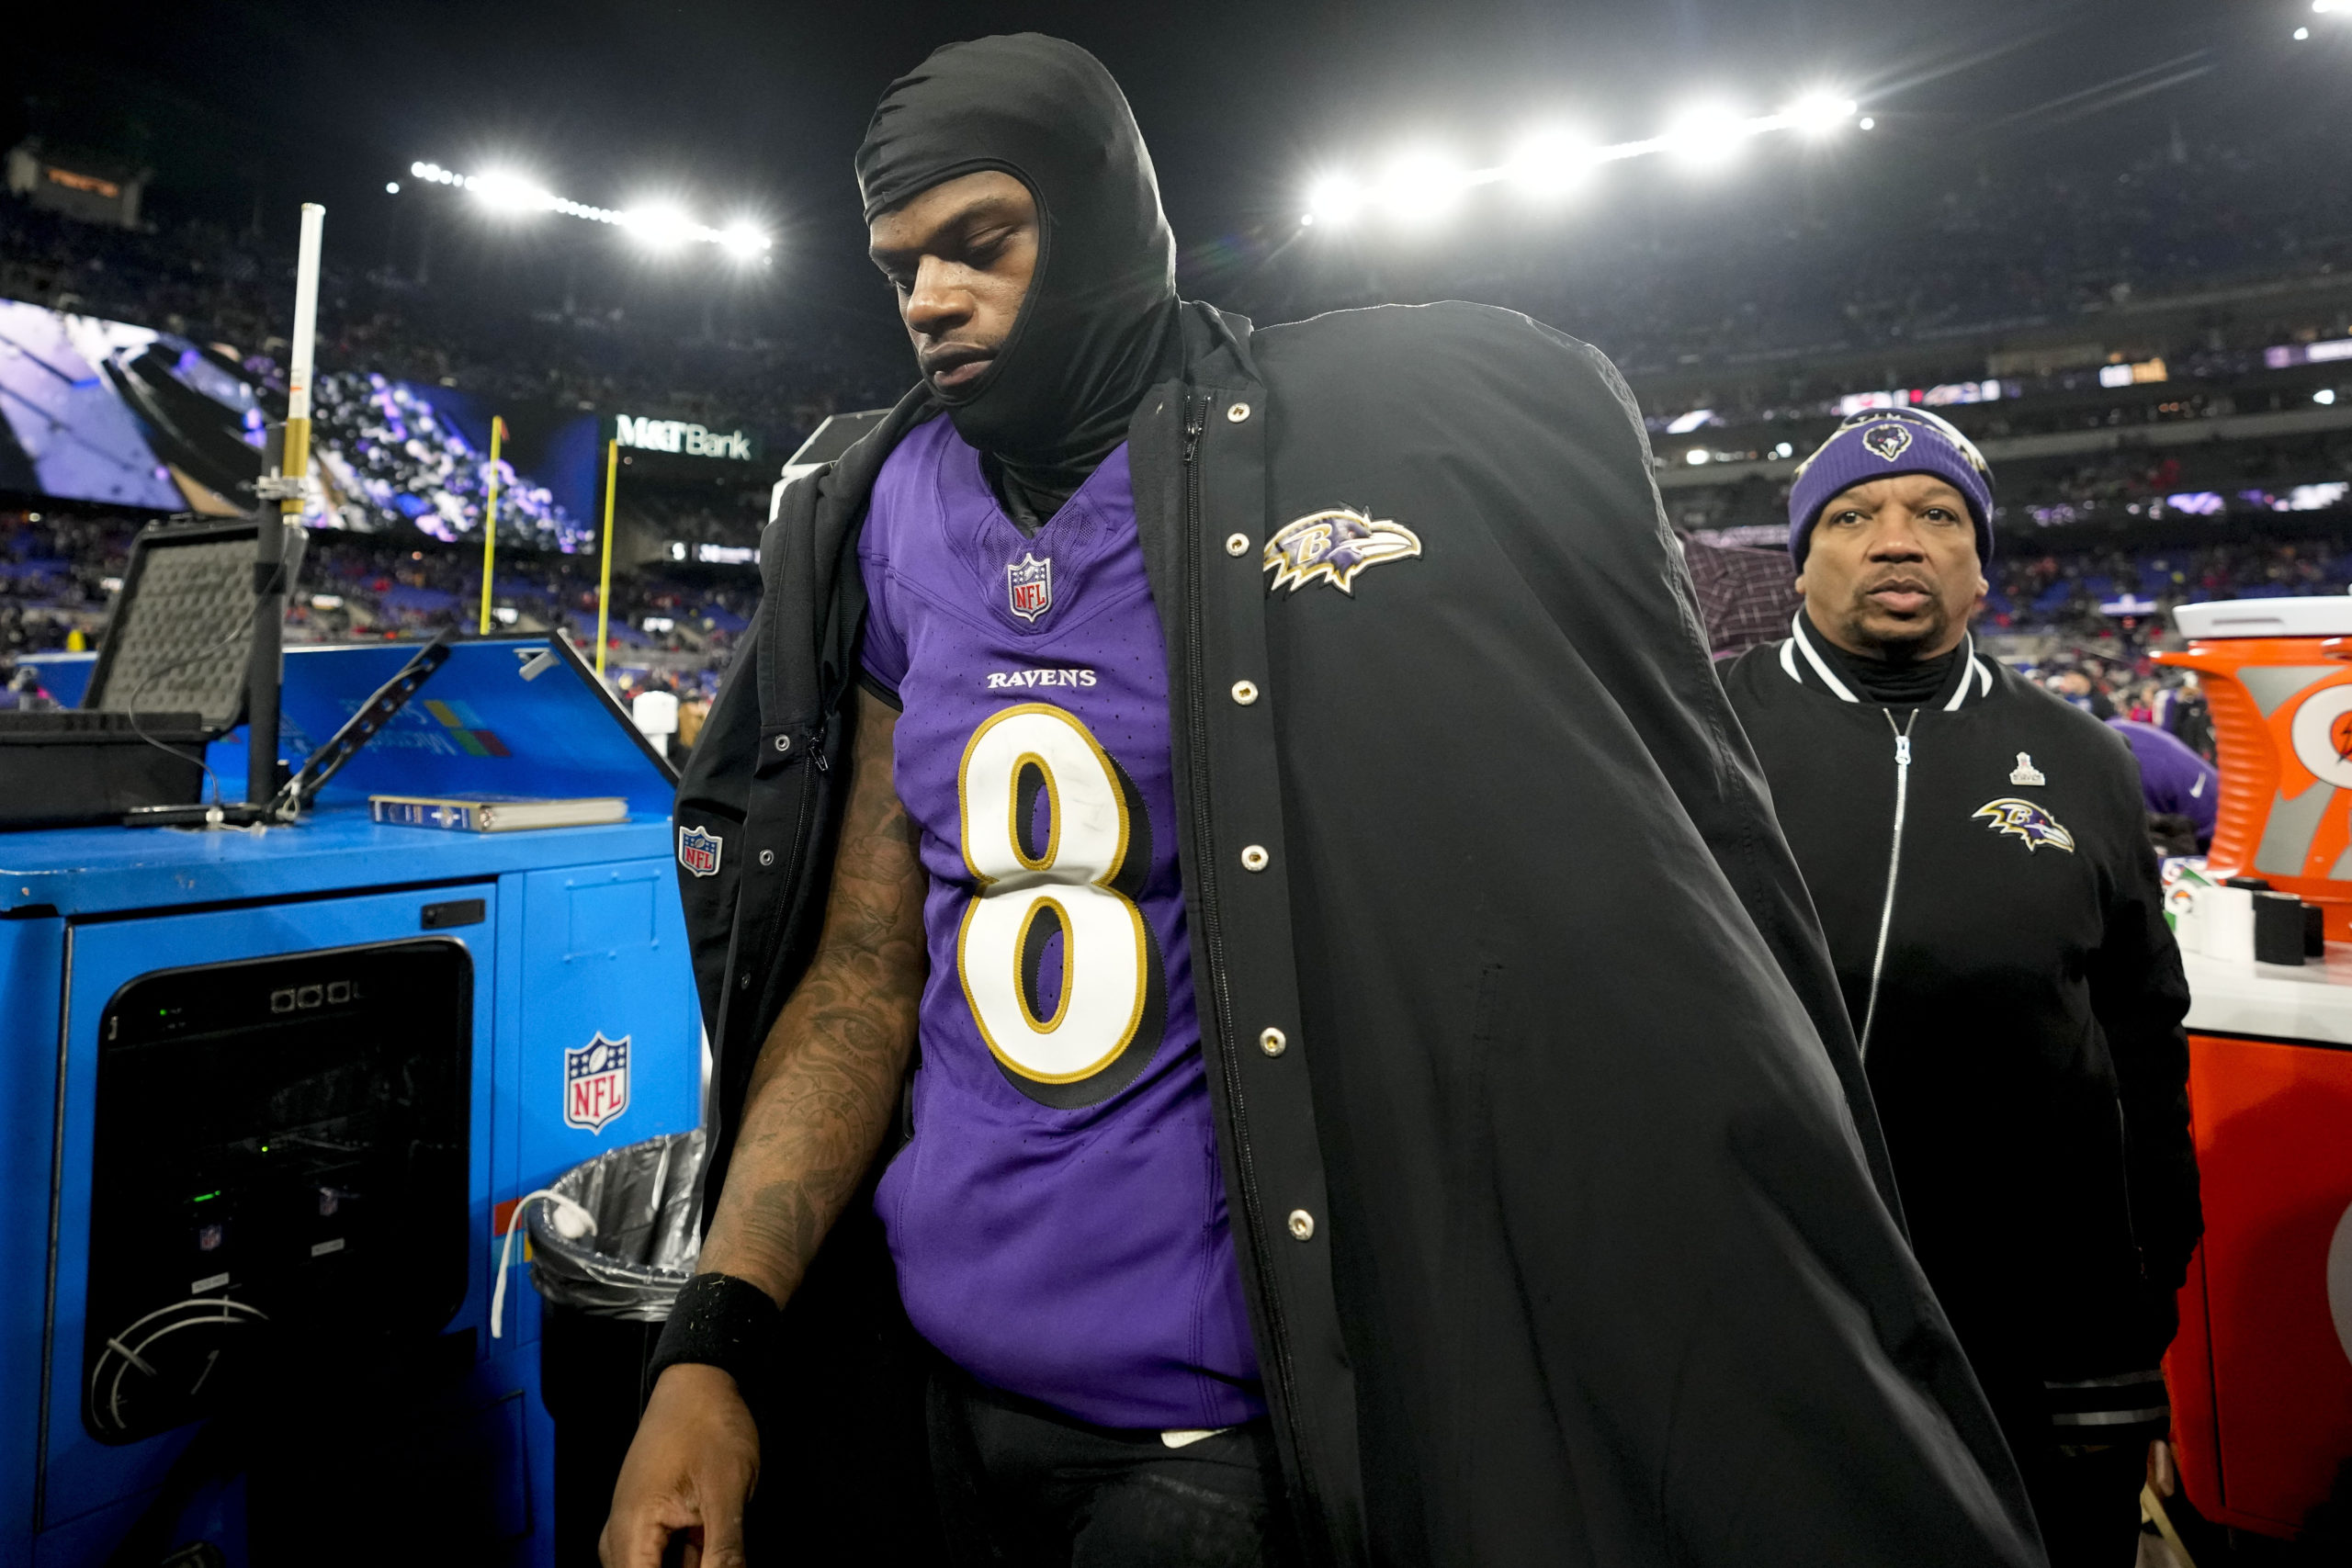 Baltimore Ravens quarterback Lamar Jackson leaves the field after an AFC Championship NFL football game against the Kansas City Chiefs in Baltimore, Maryland, on Sunday.